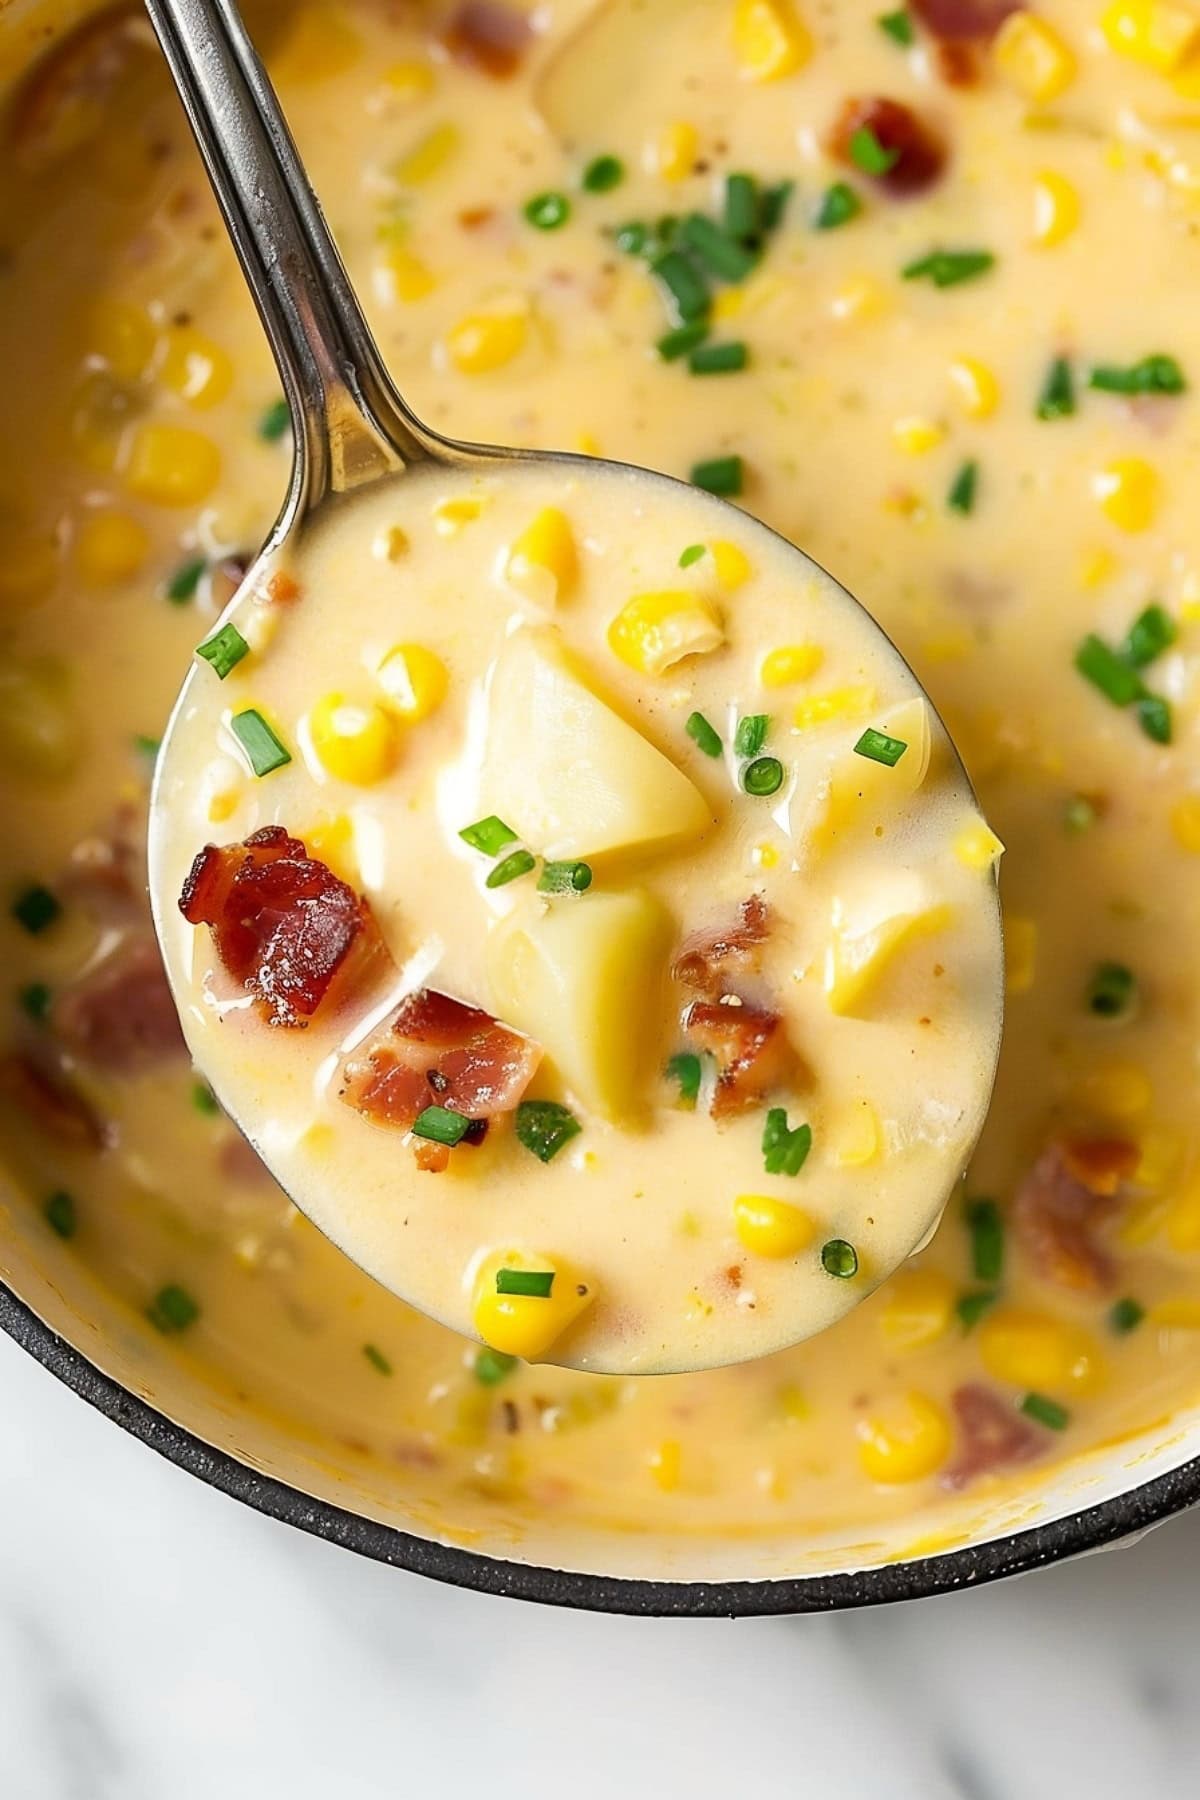 Savory corn chowder, with chunks of potatoes, bacon, chives and a creamy, buttery broth.